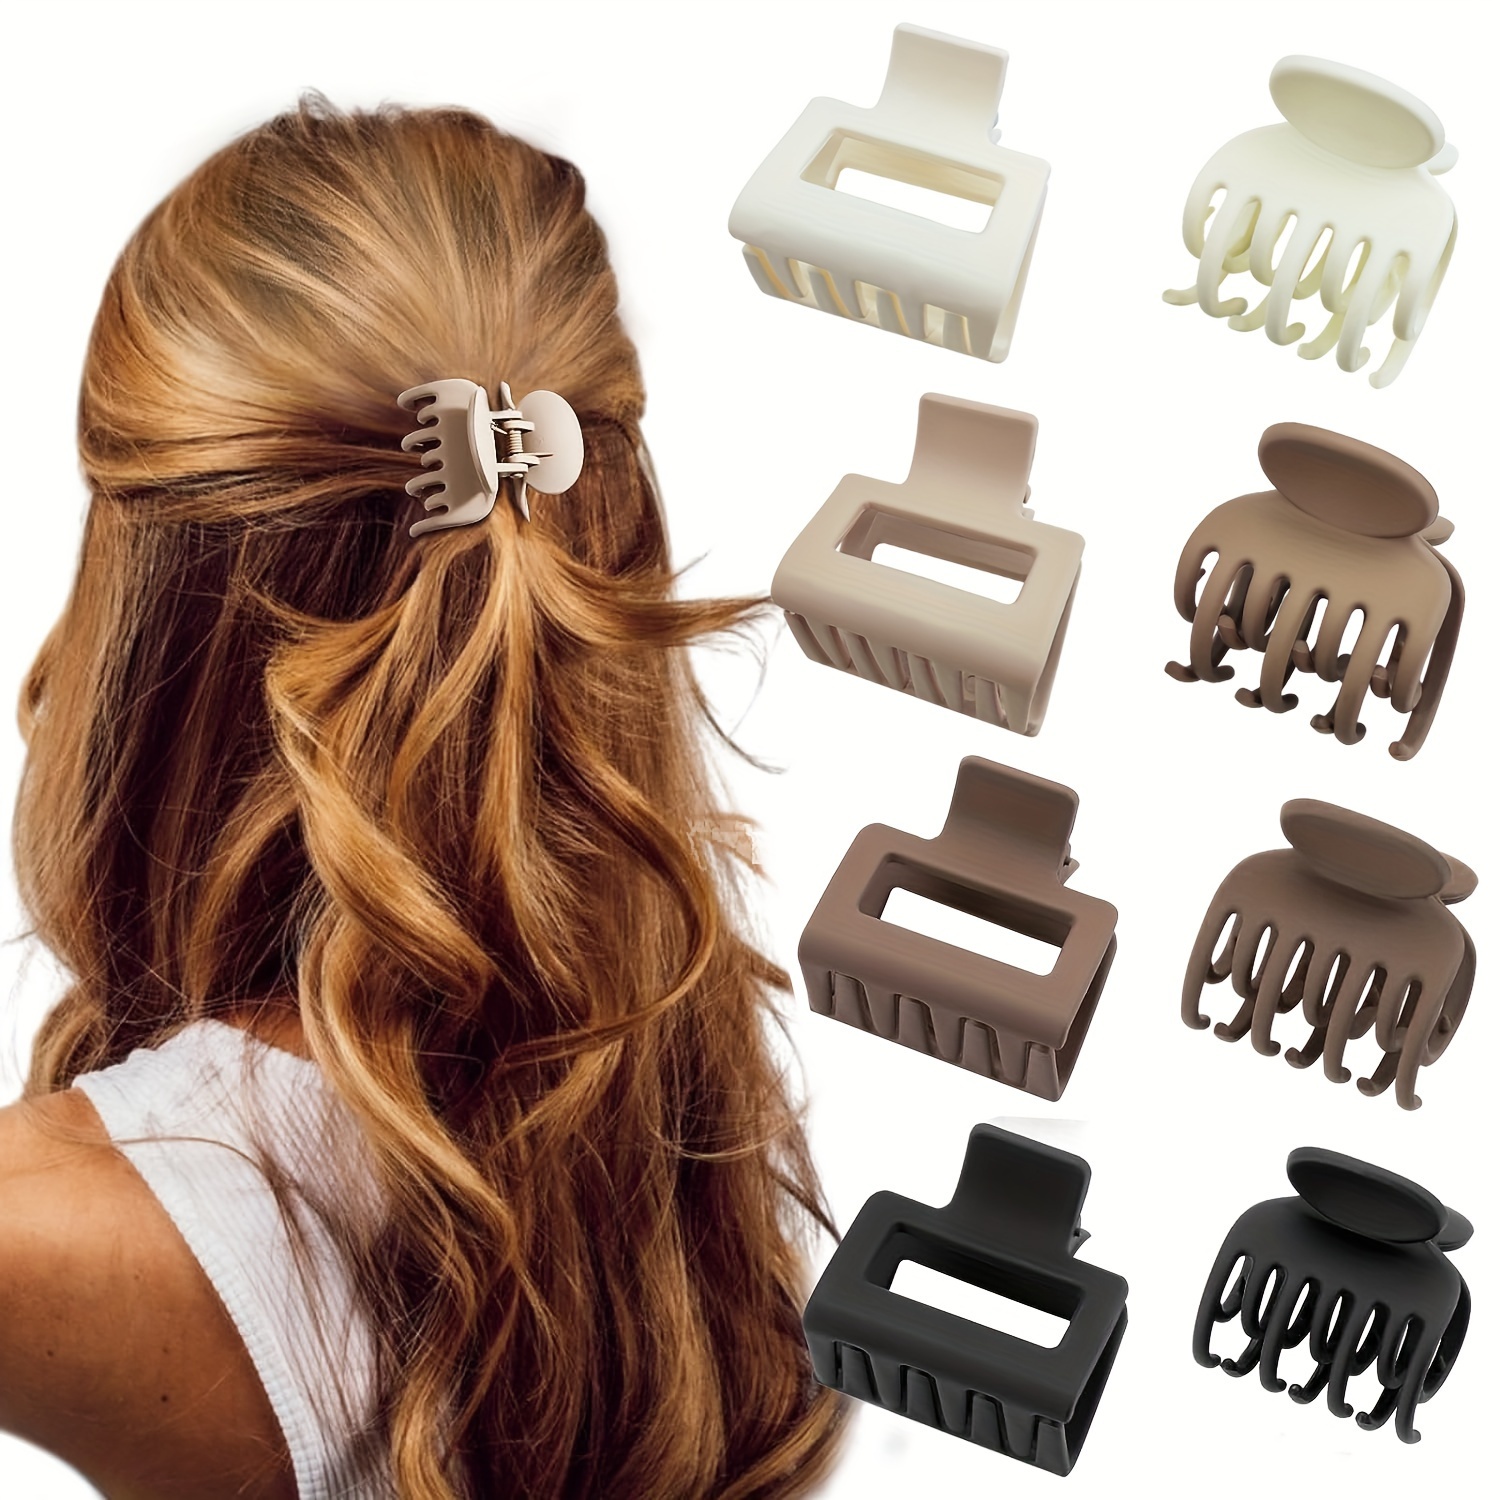  4.3 Inch 6pcs Hair Clips, Hair Clips for Women & Girls, Matte  Finish Claw Clips for Thin hair, Large Claw Clips for Thick Hair, Daily Use  Jumbo Size Hair Claw Clips